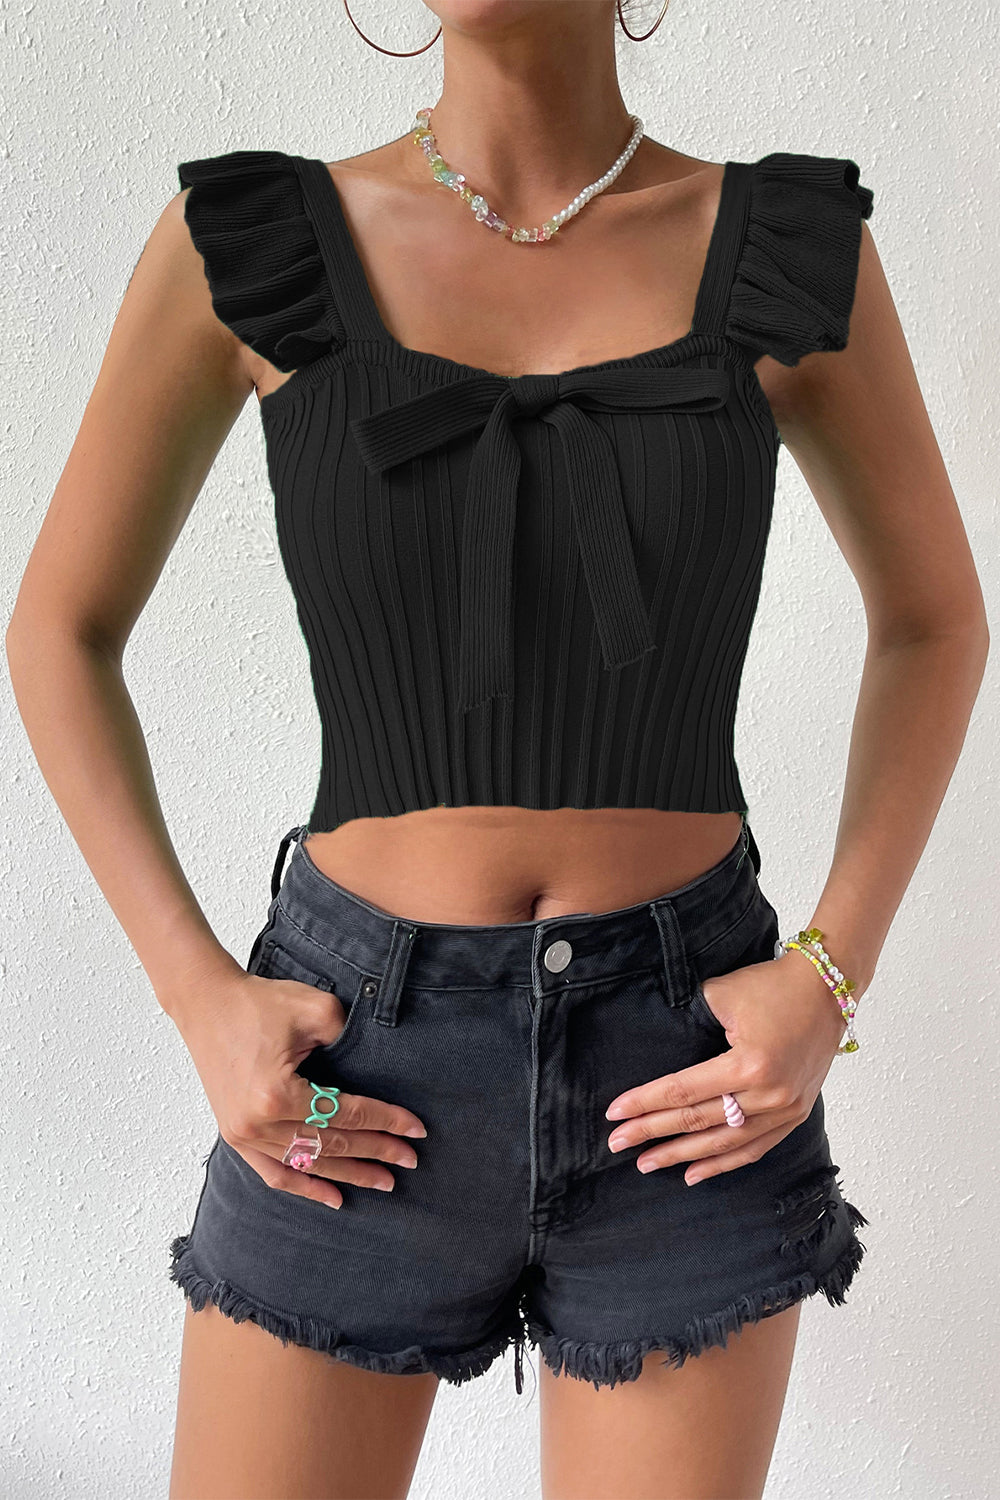 Stylish Square Neck Tie Front Knit Top Black